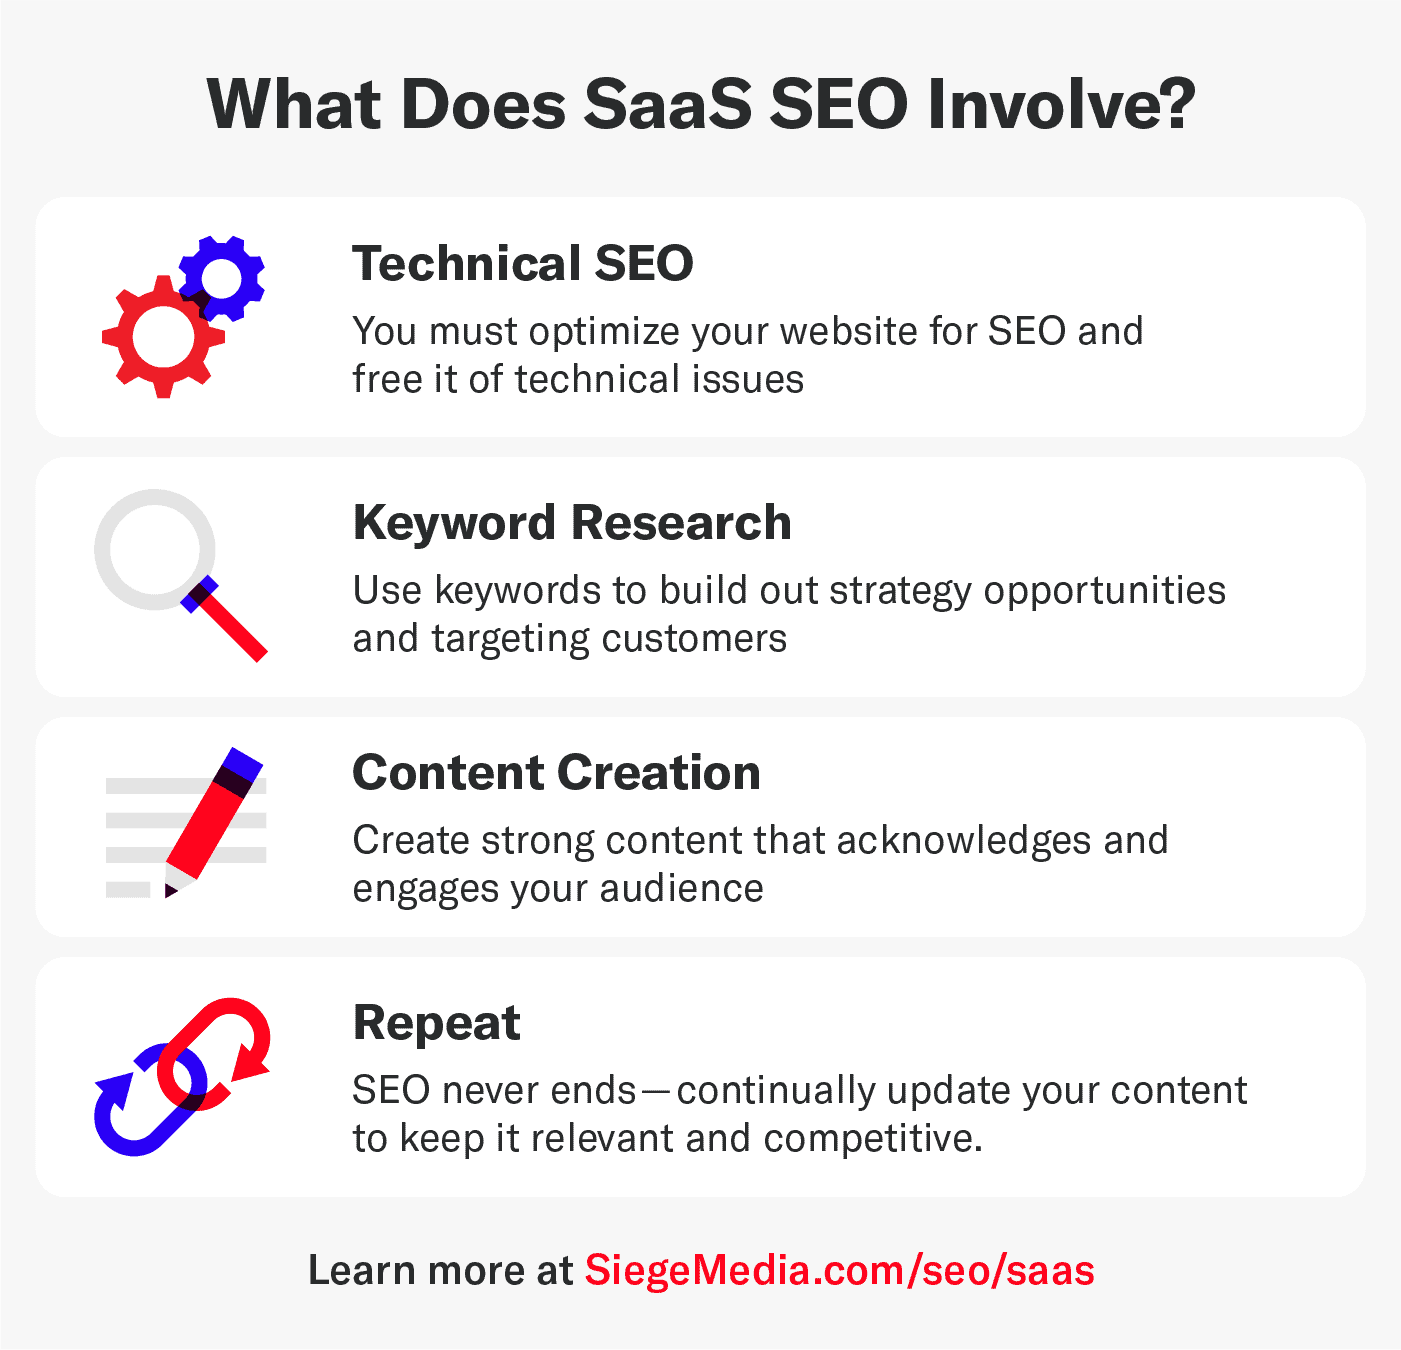 Graphic discussing what SaaS SEO involves